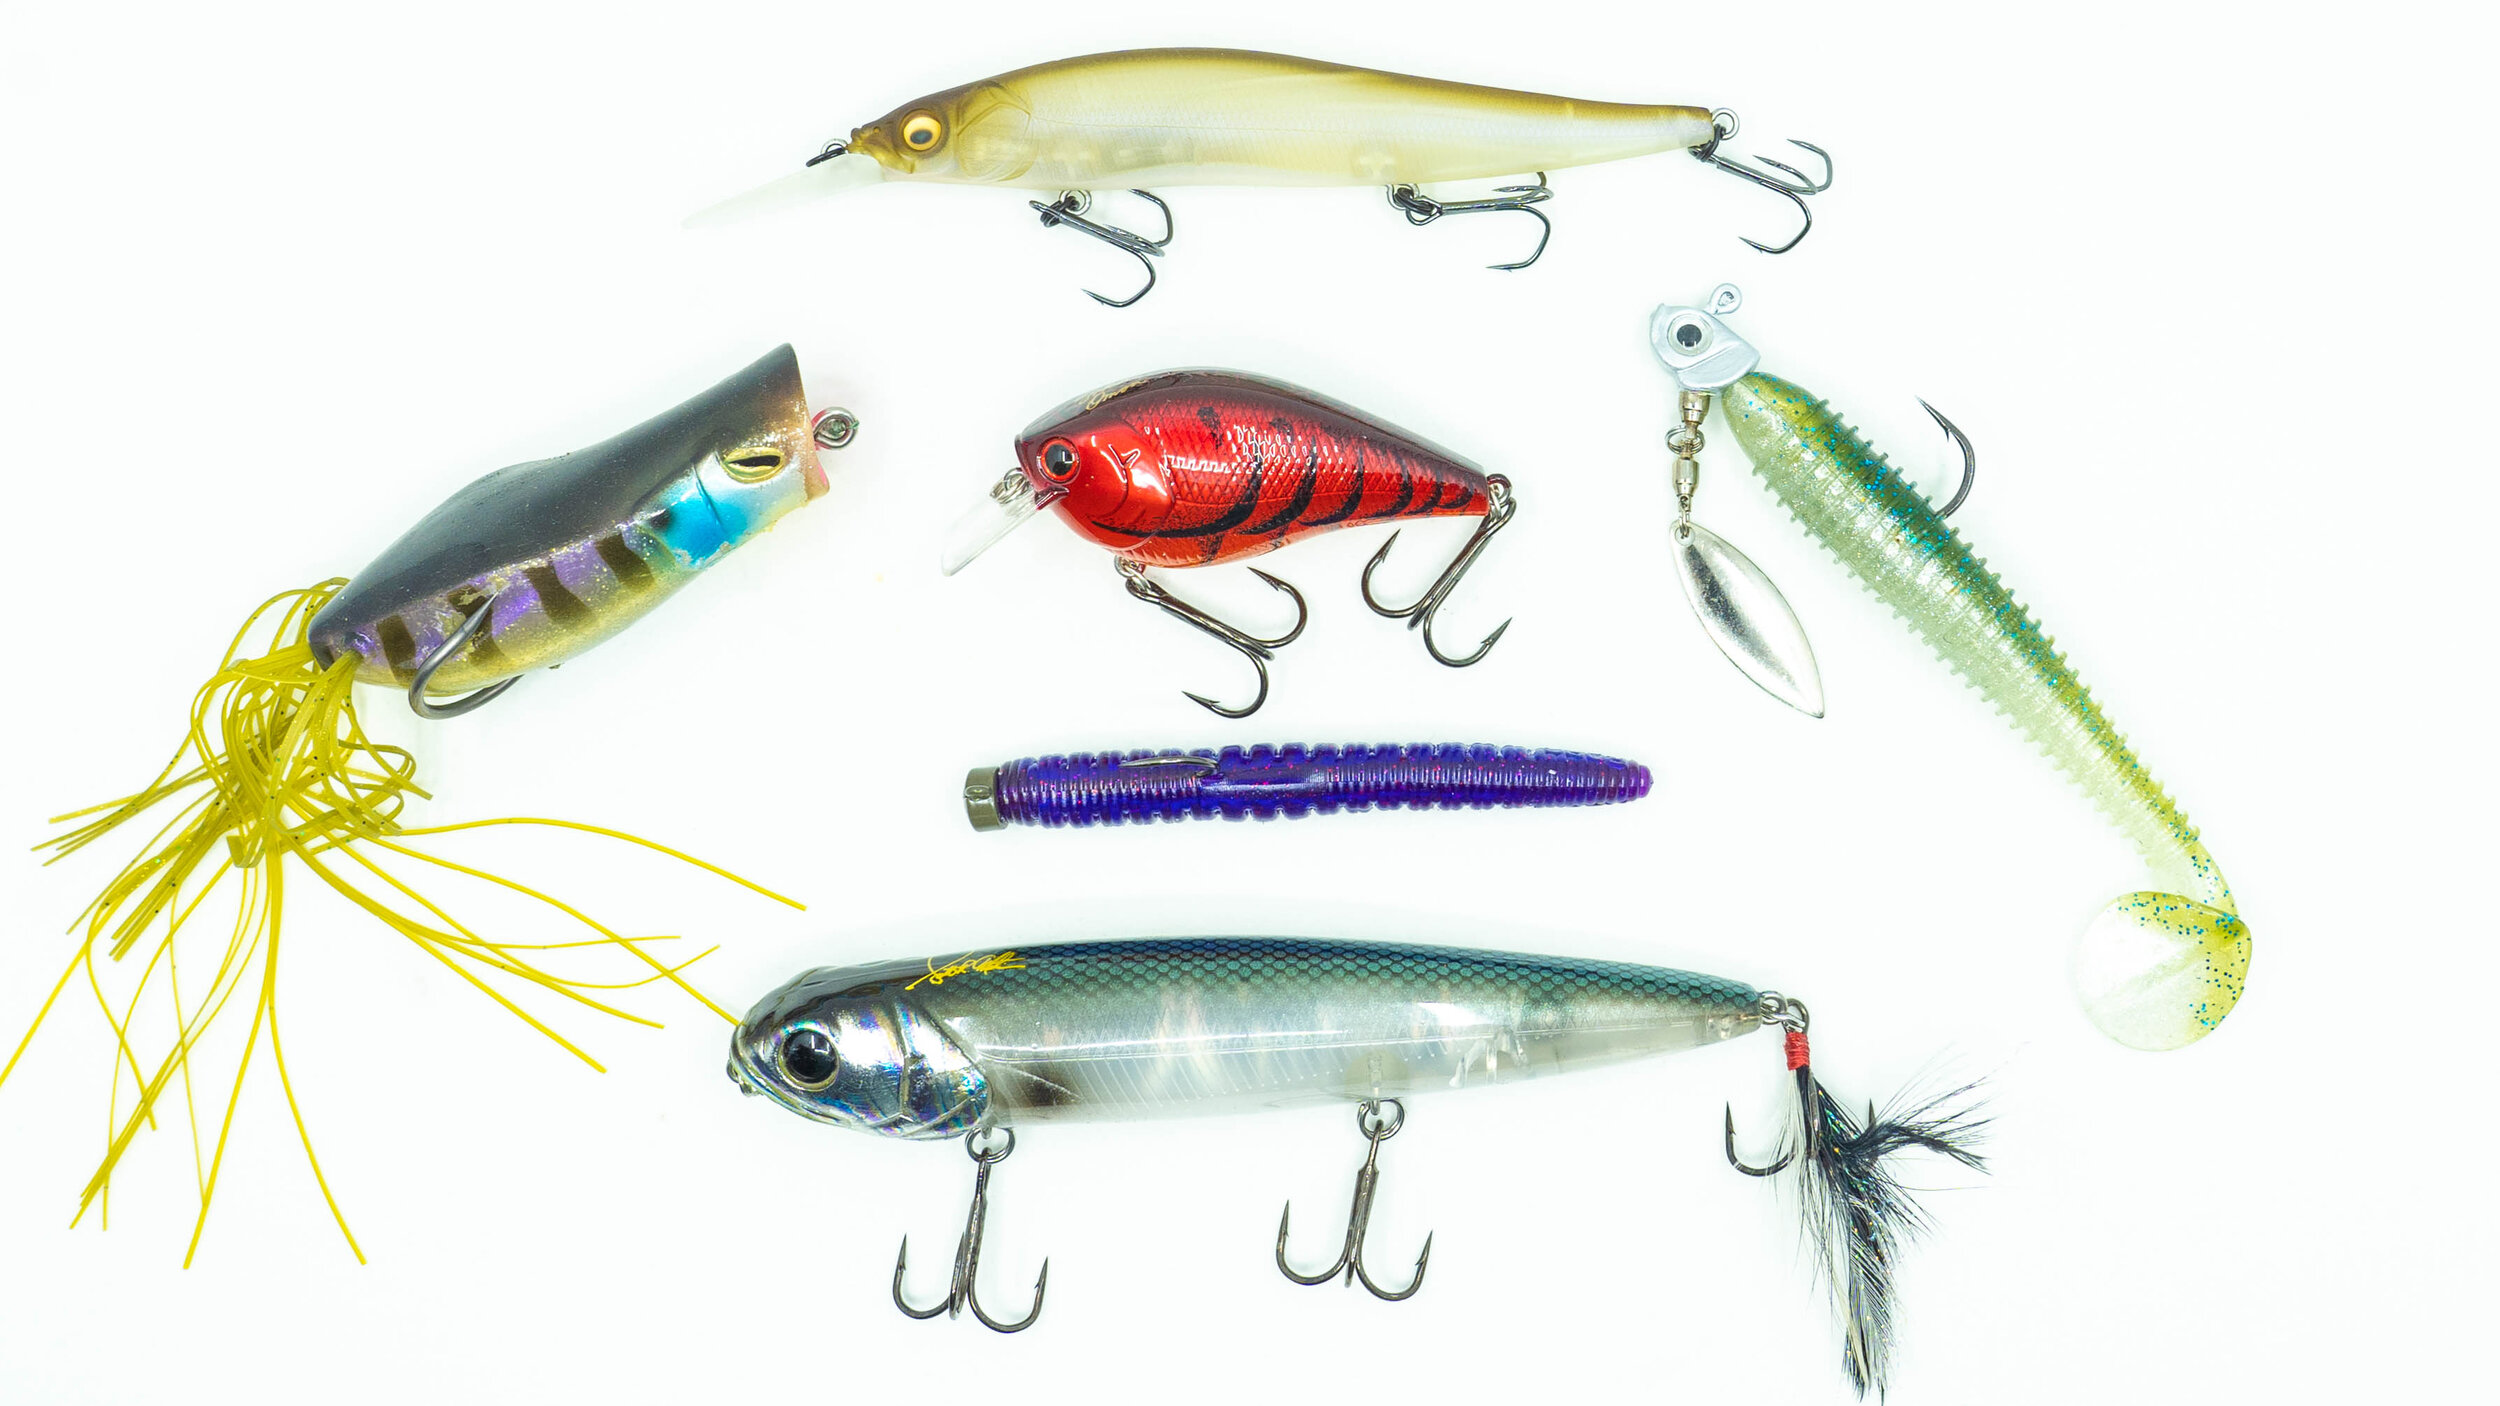 Three Favorite River Lures for Big Bass